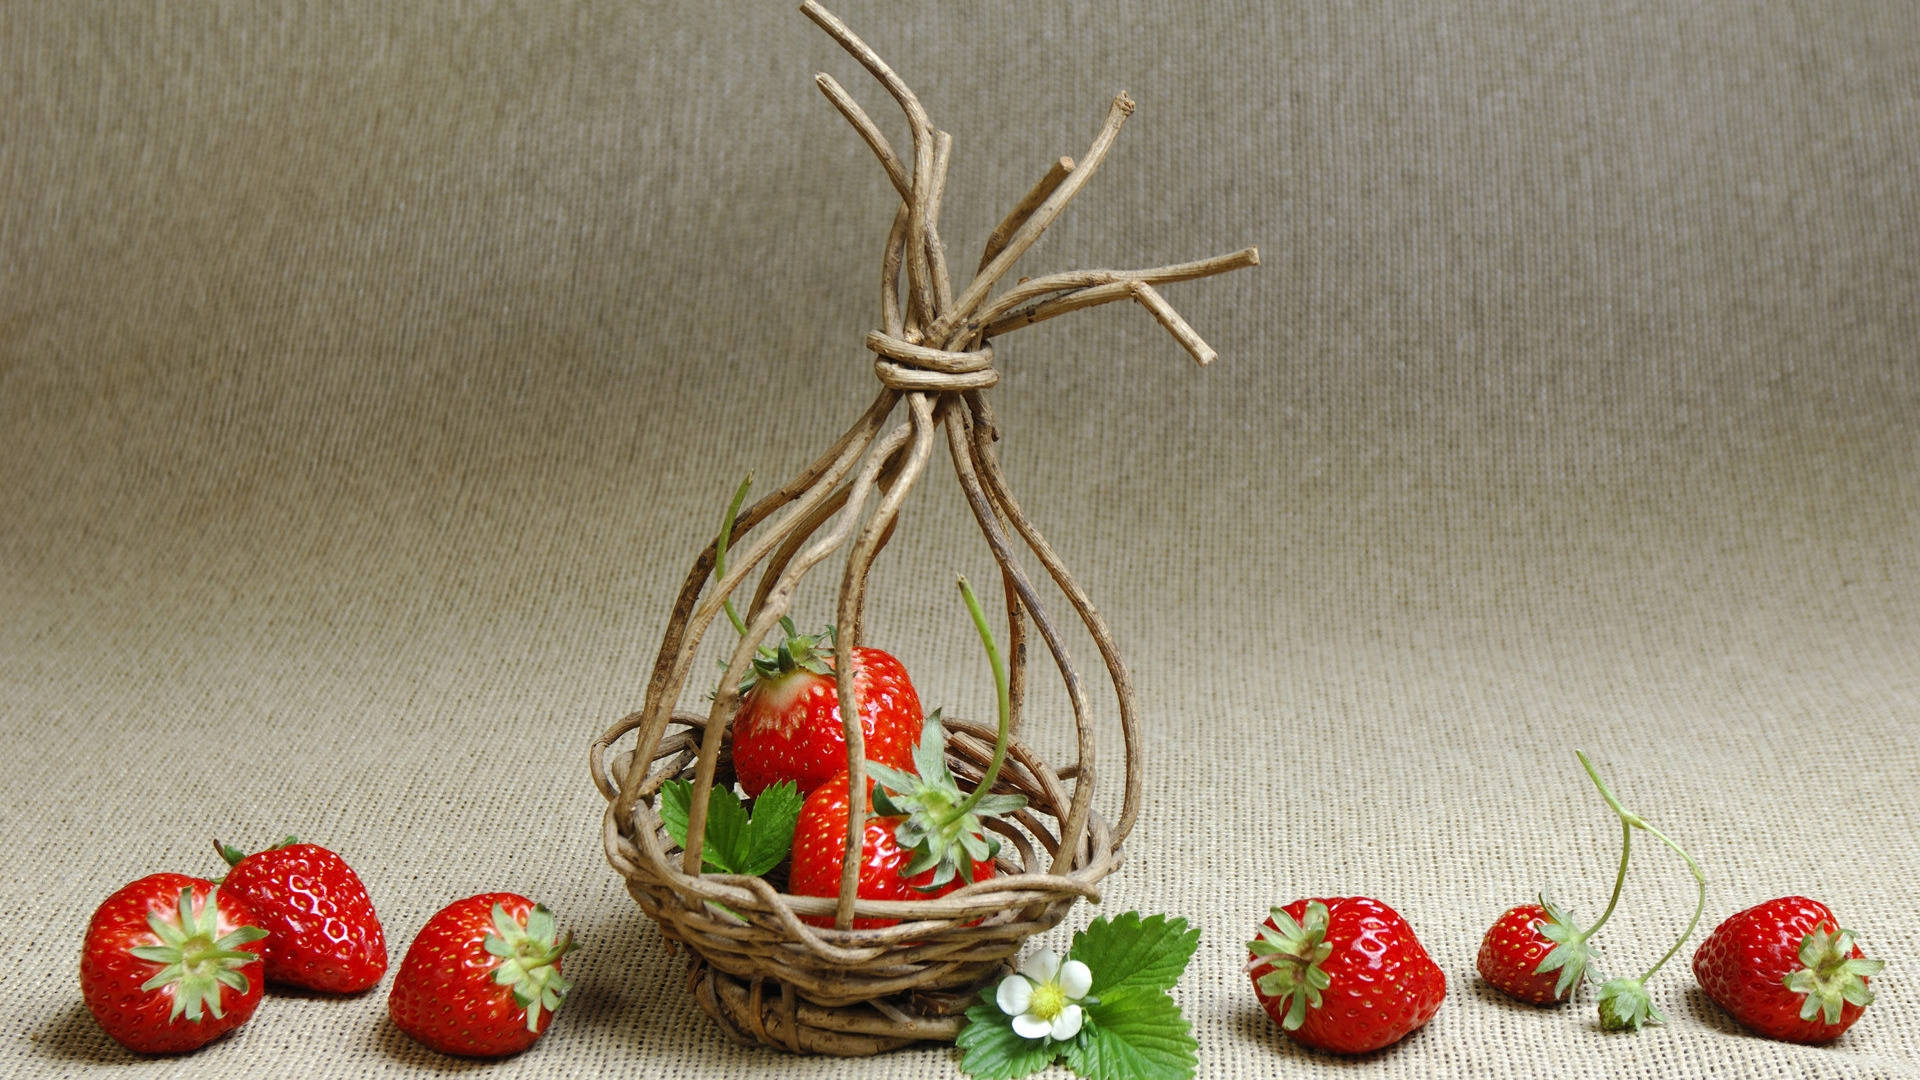 Woven Nest With Strawberry Desktop Picture